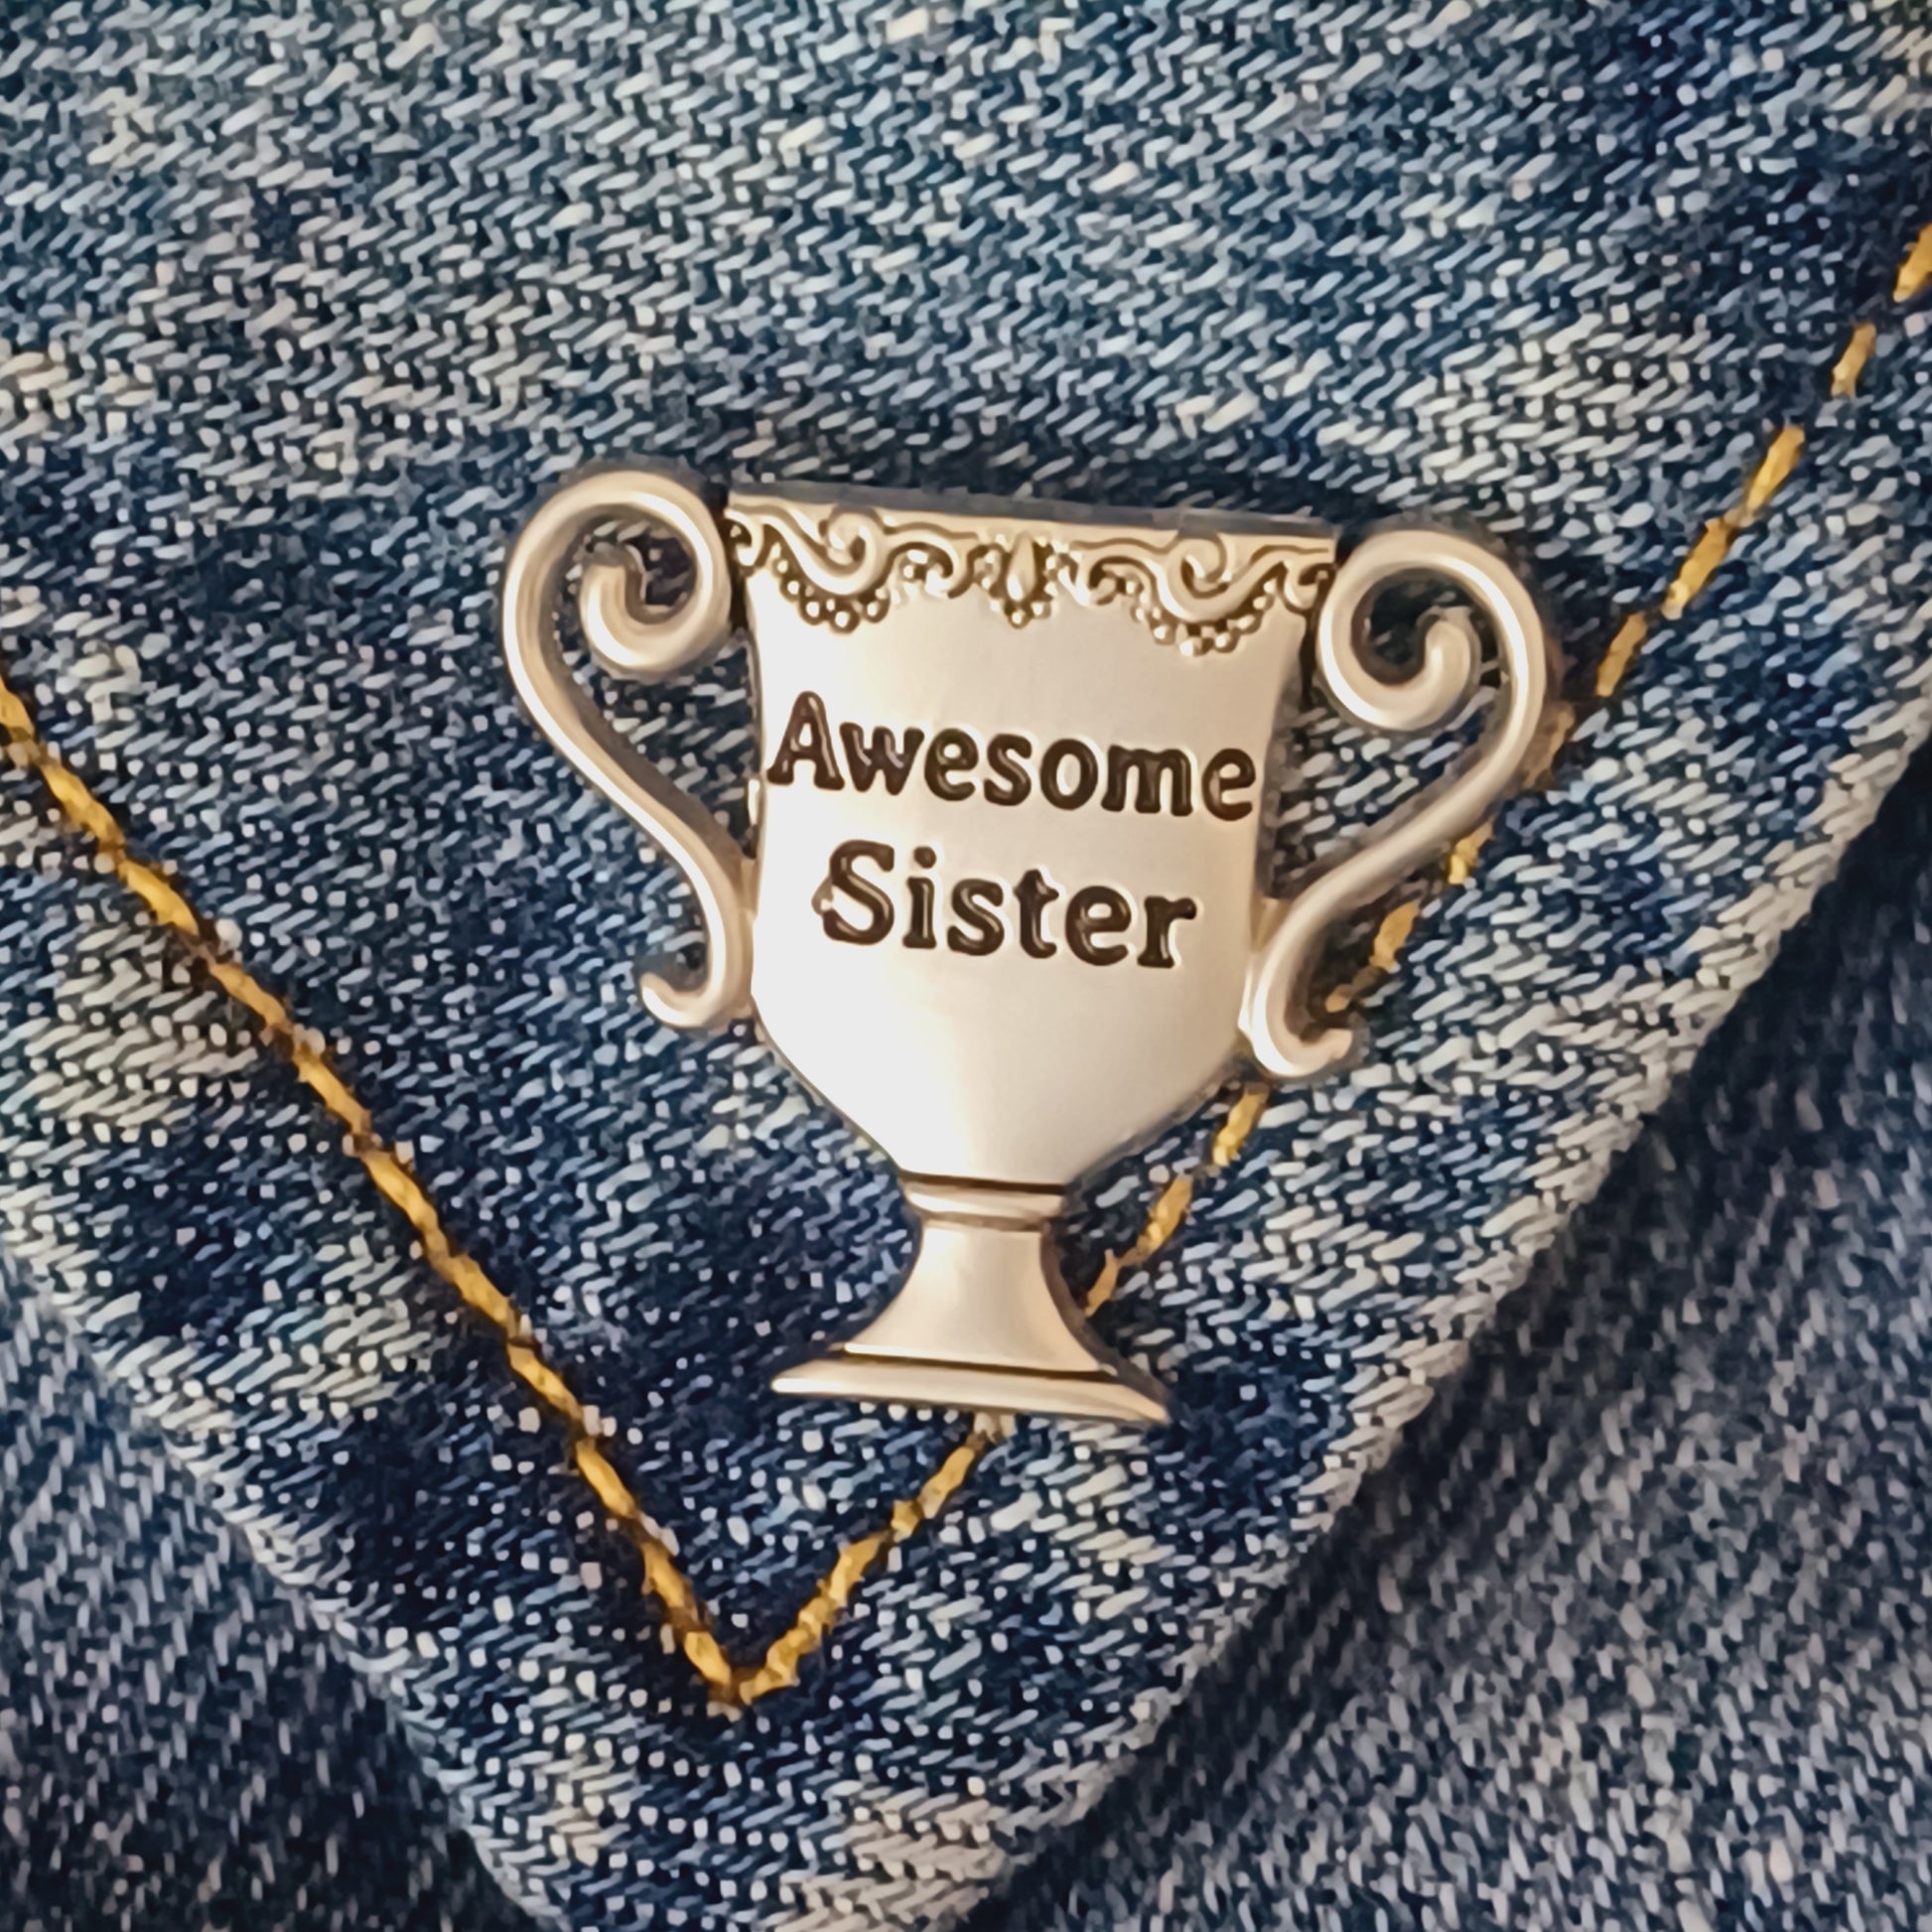 Pin on Awesome Pins!